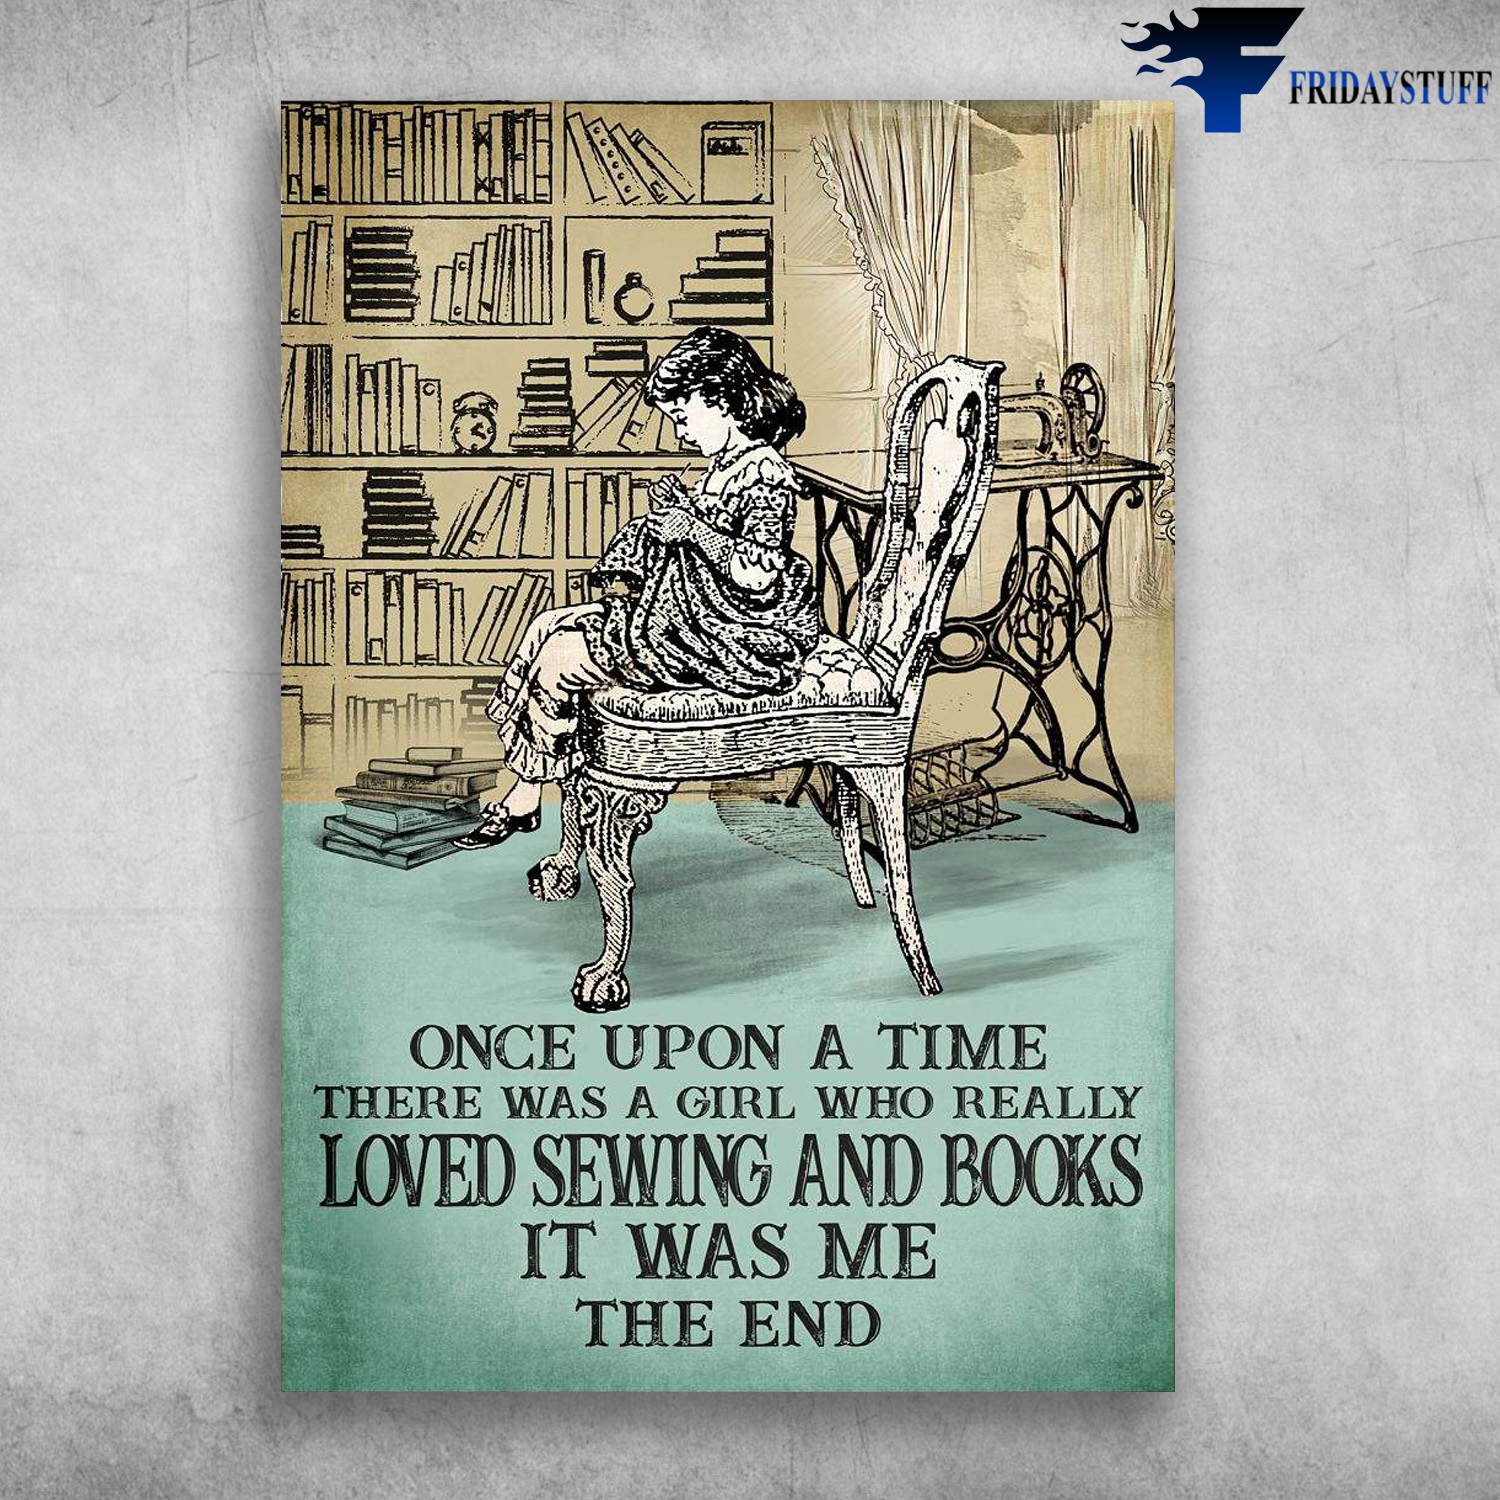 Girl Sewing, Sewing And Book - Once Upon A Time, There Was A Girl, Who Really Loved Sewing And Books, It Was Me, The End